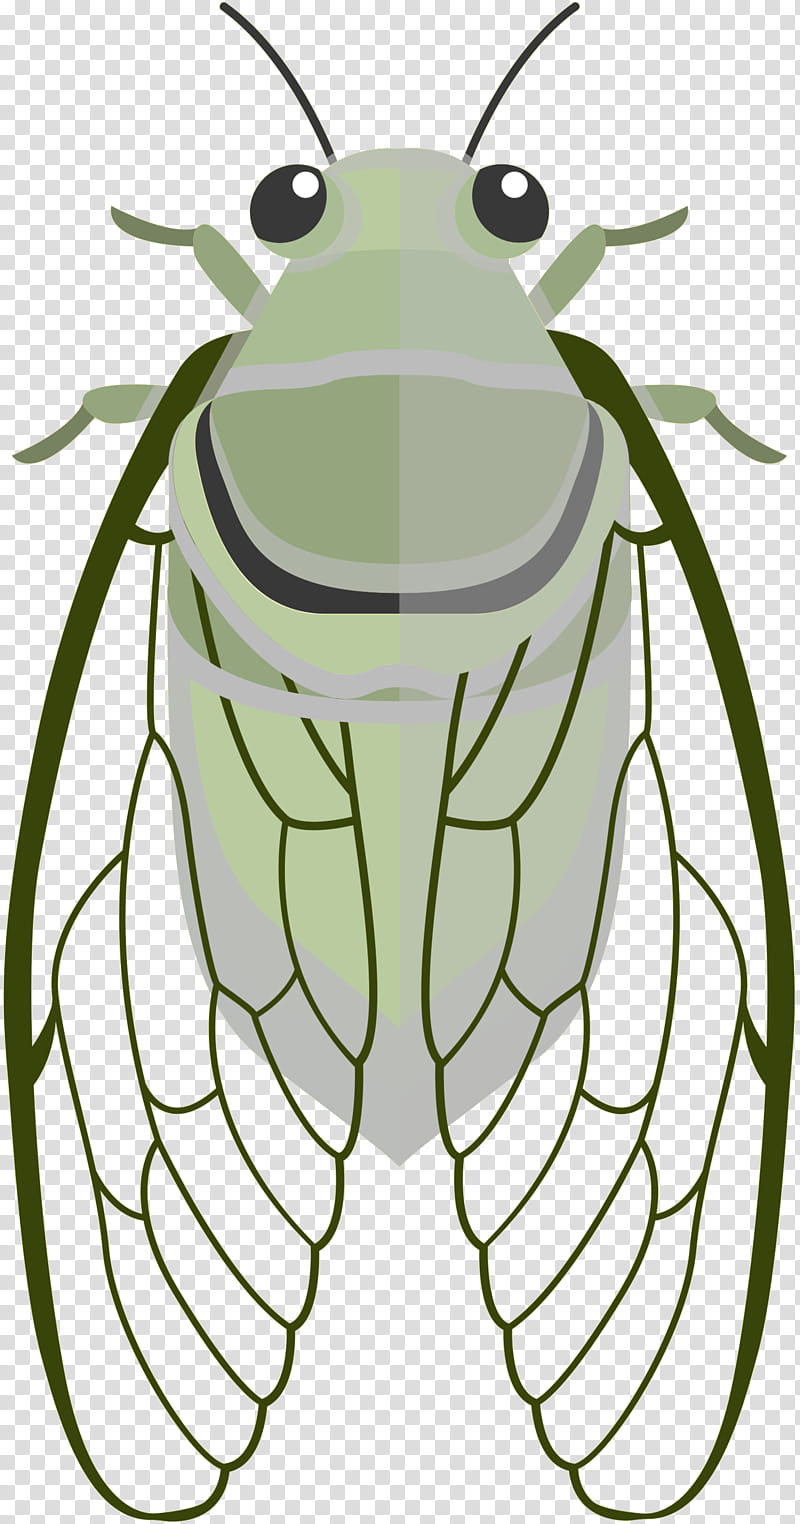 Ant, Insect, Bee, Hornet, Cicadoidea, Cartoon, Drawing, Cicada transparent background PNG clipart